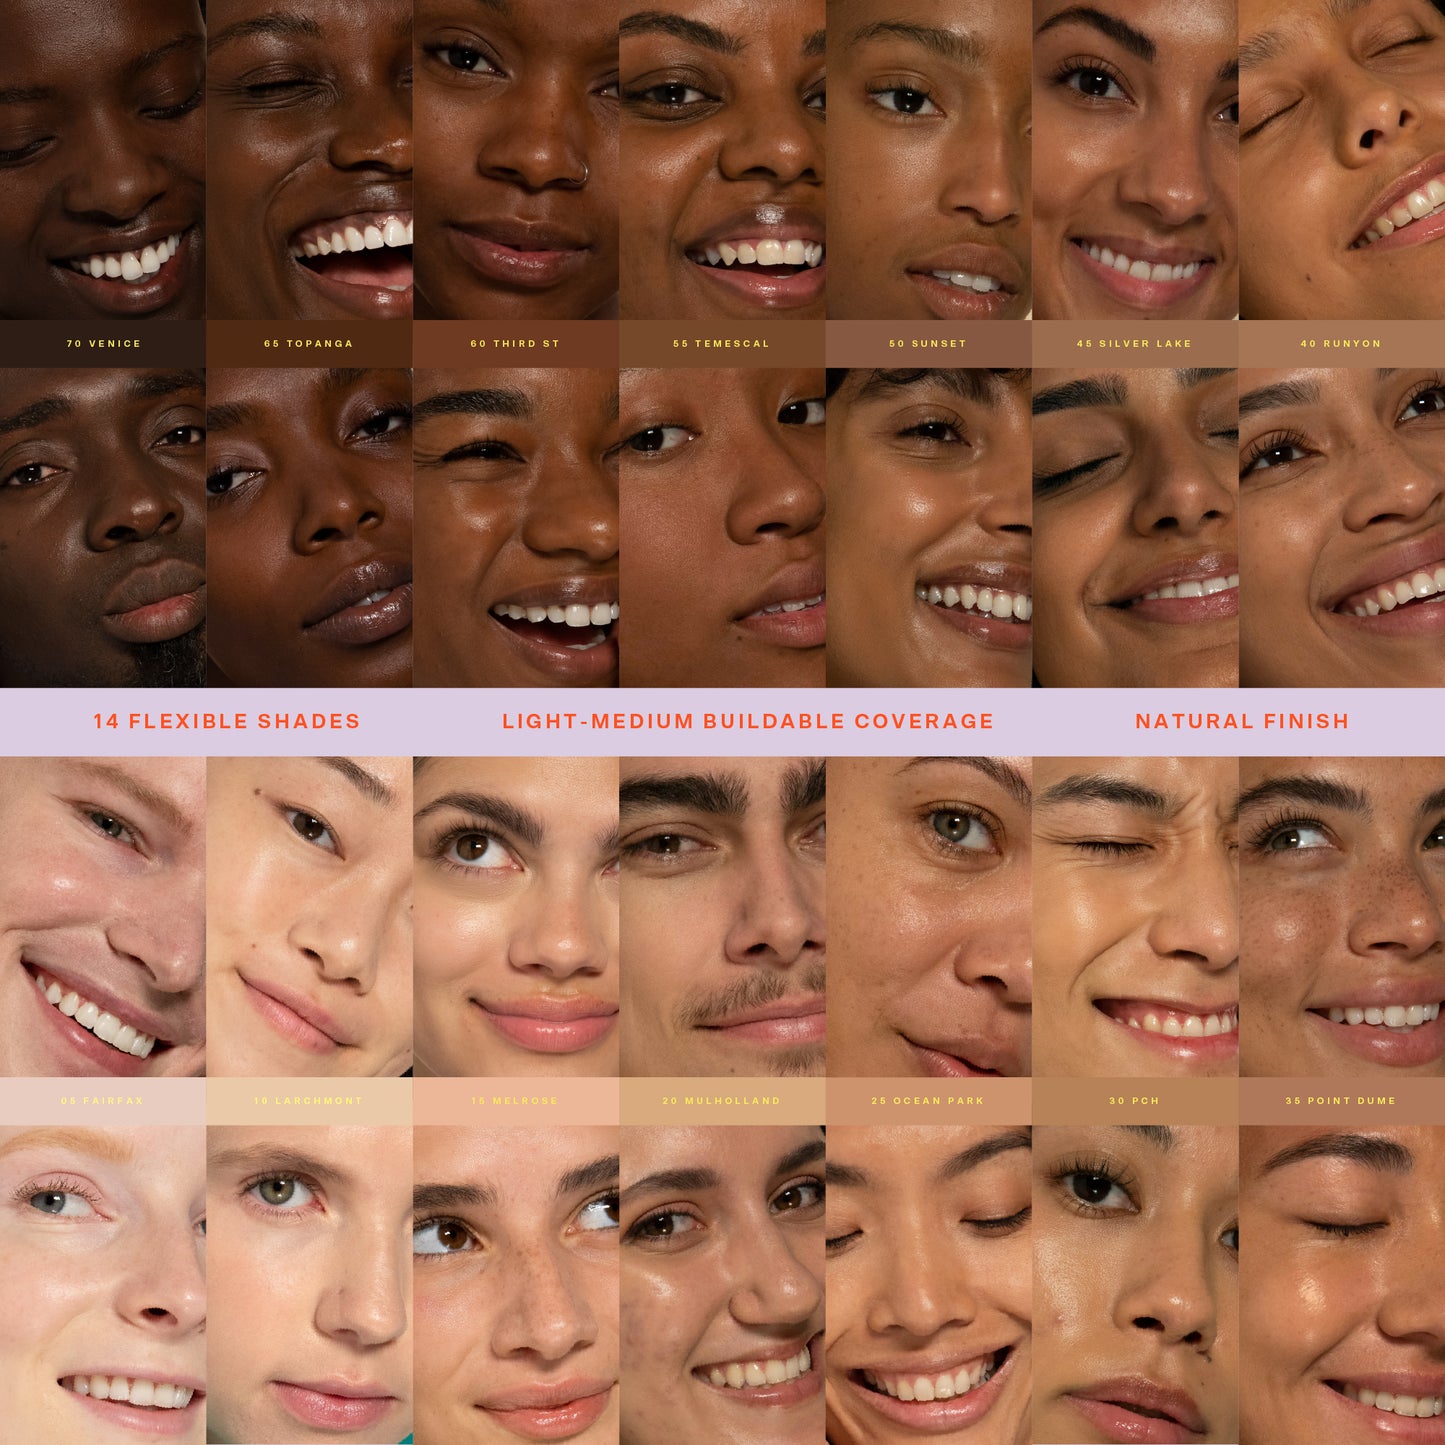 [Shared: All Tower 28 Beauty SunnyDays SPF 30 Tinted Sunscreen on models of different skin tones]